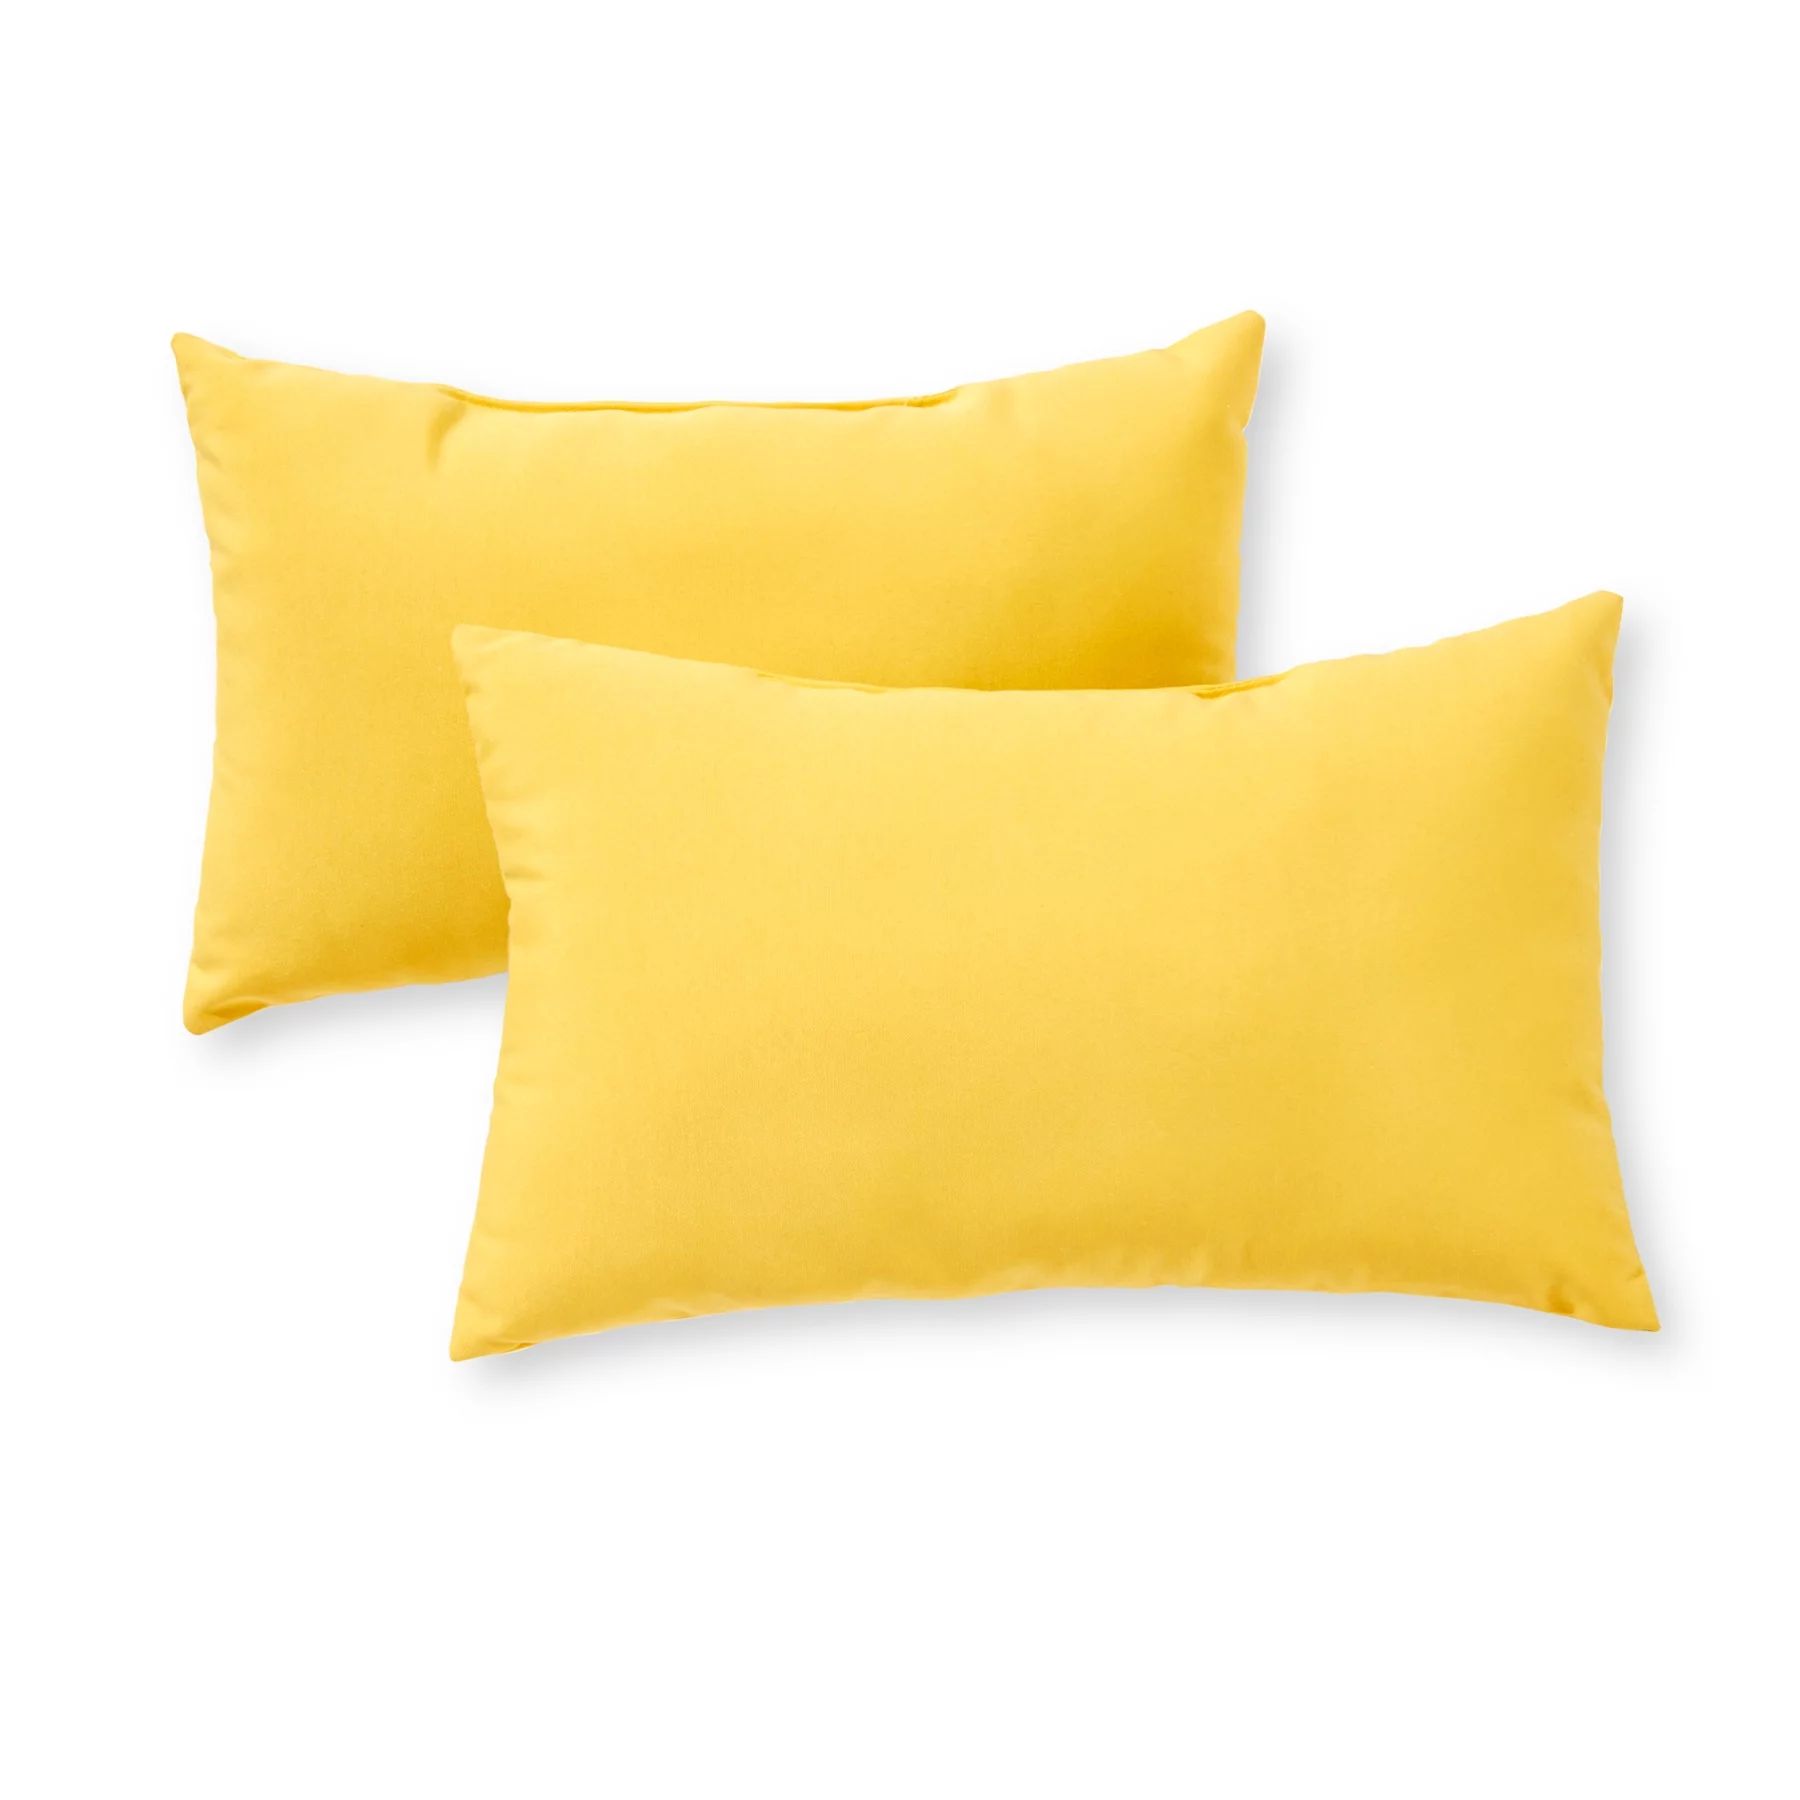 Sunbeam Yellow 19 x 12 in. Outdoor Rectangle Throw Pillow (Set of 2) by Greendale Home Fashions | Walmart (US)